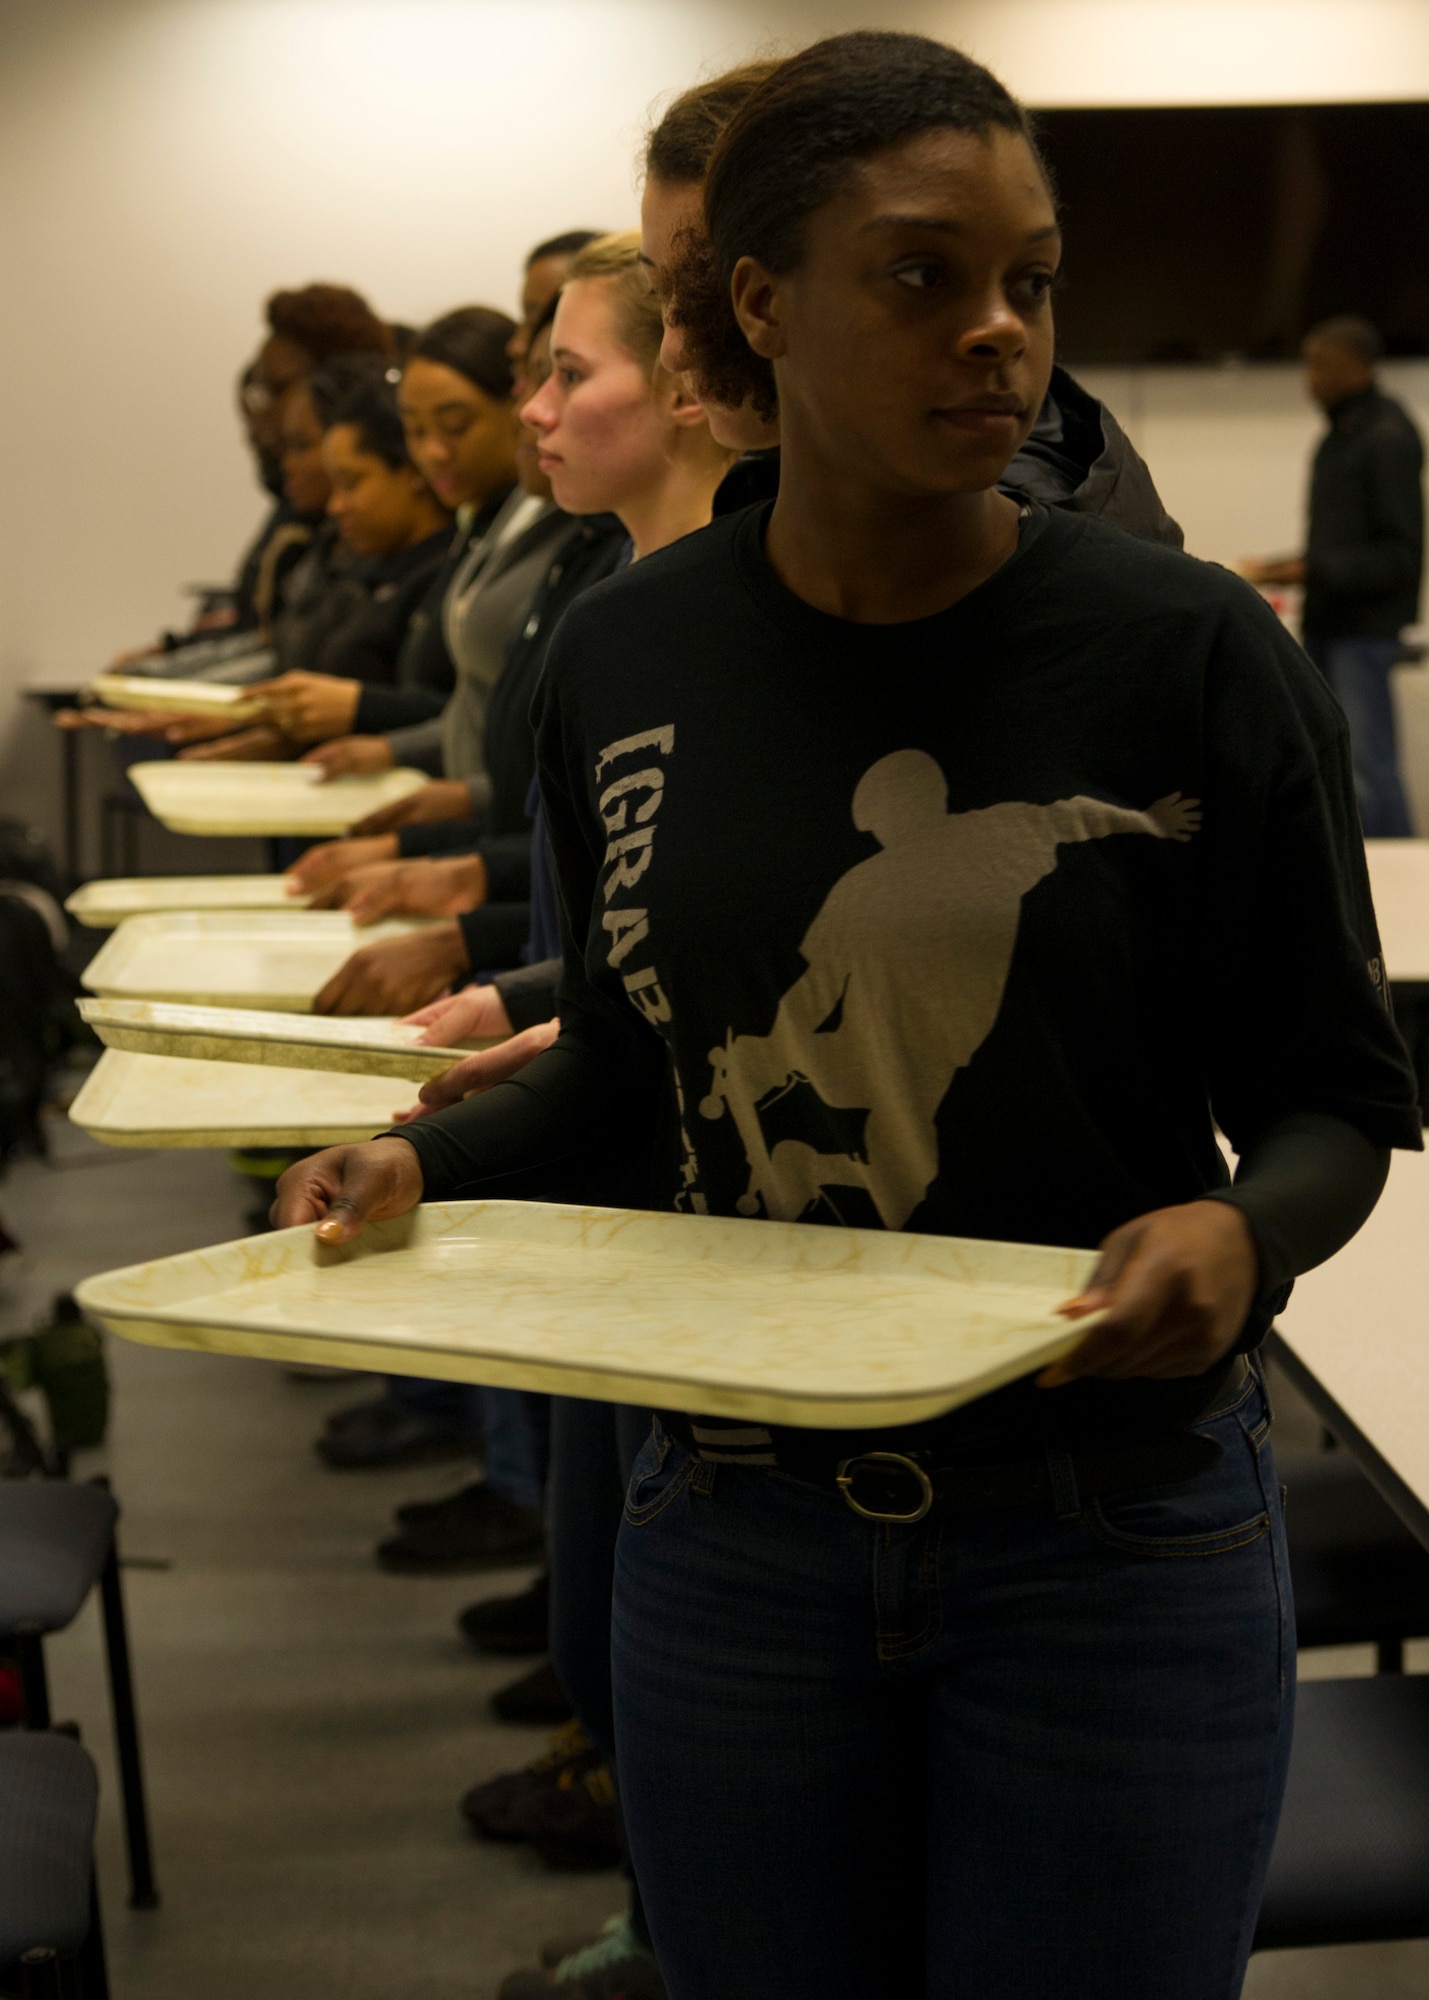 Trainees from the Development and Training Flight simulate basic training dining facility procedures January 9, 2016 at Joint Base Charleston. Tech. Sgt. Joshua Melton, the DTF program coordinator for the 315th Airlift Wing, teaches participants the basics of marching and Air Force protocol during their duty day.